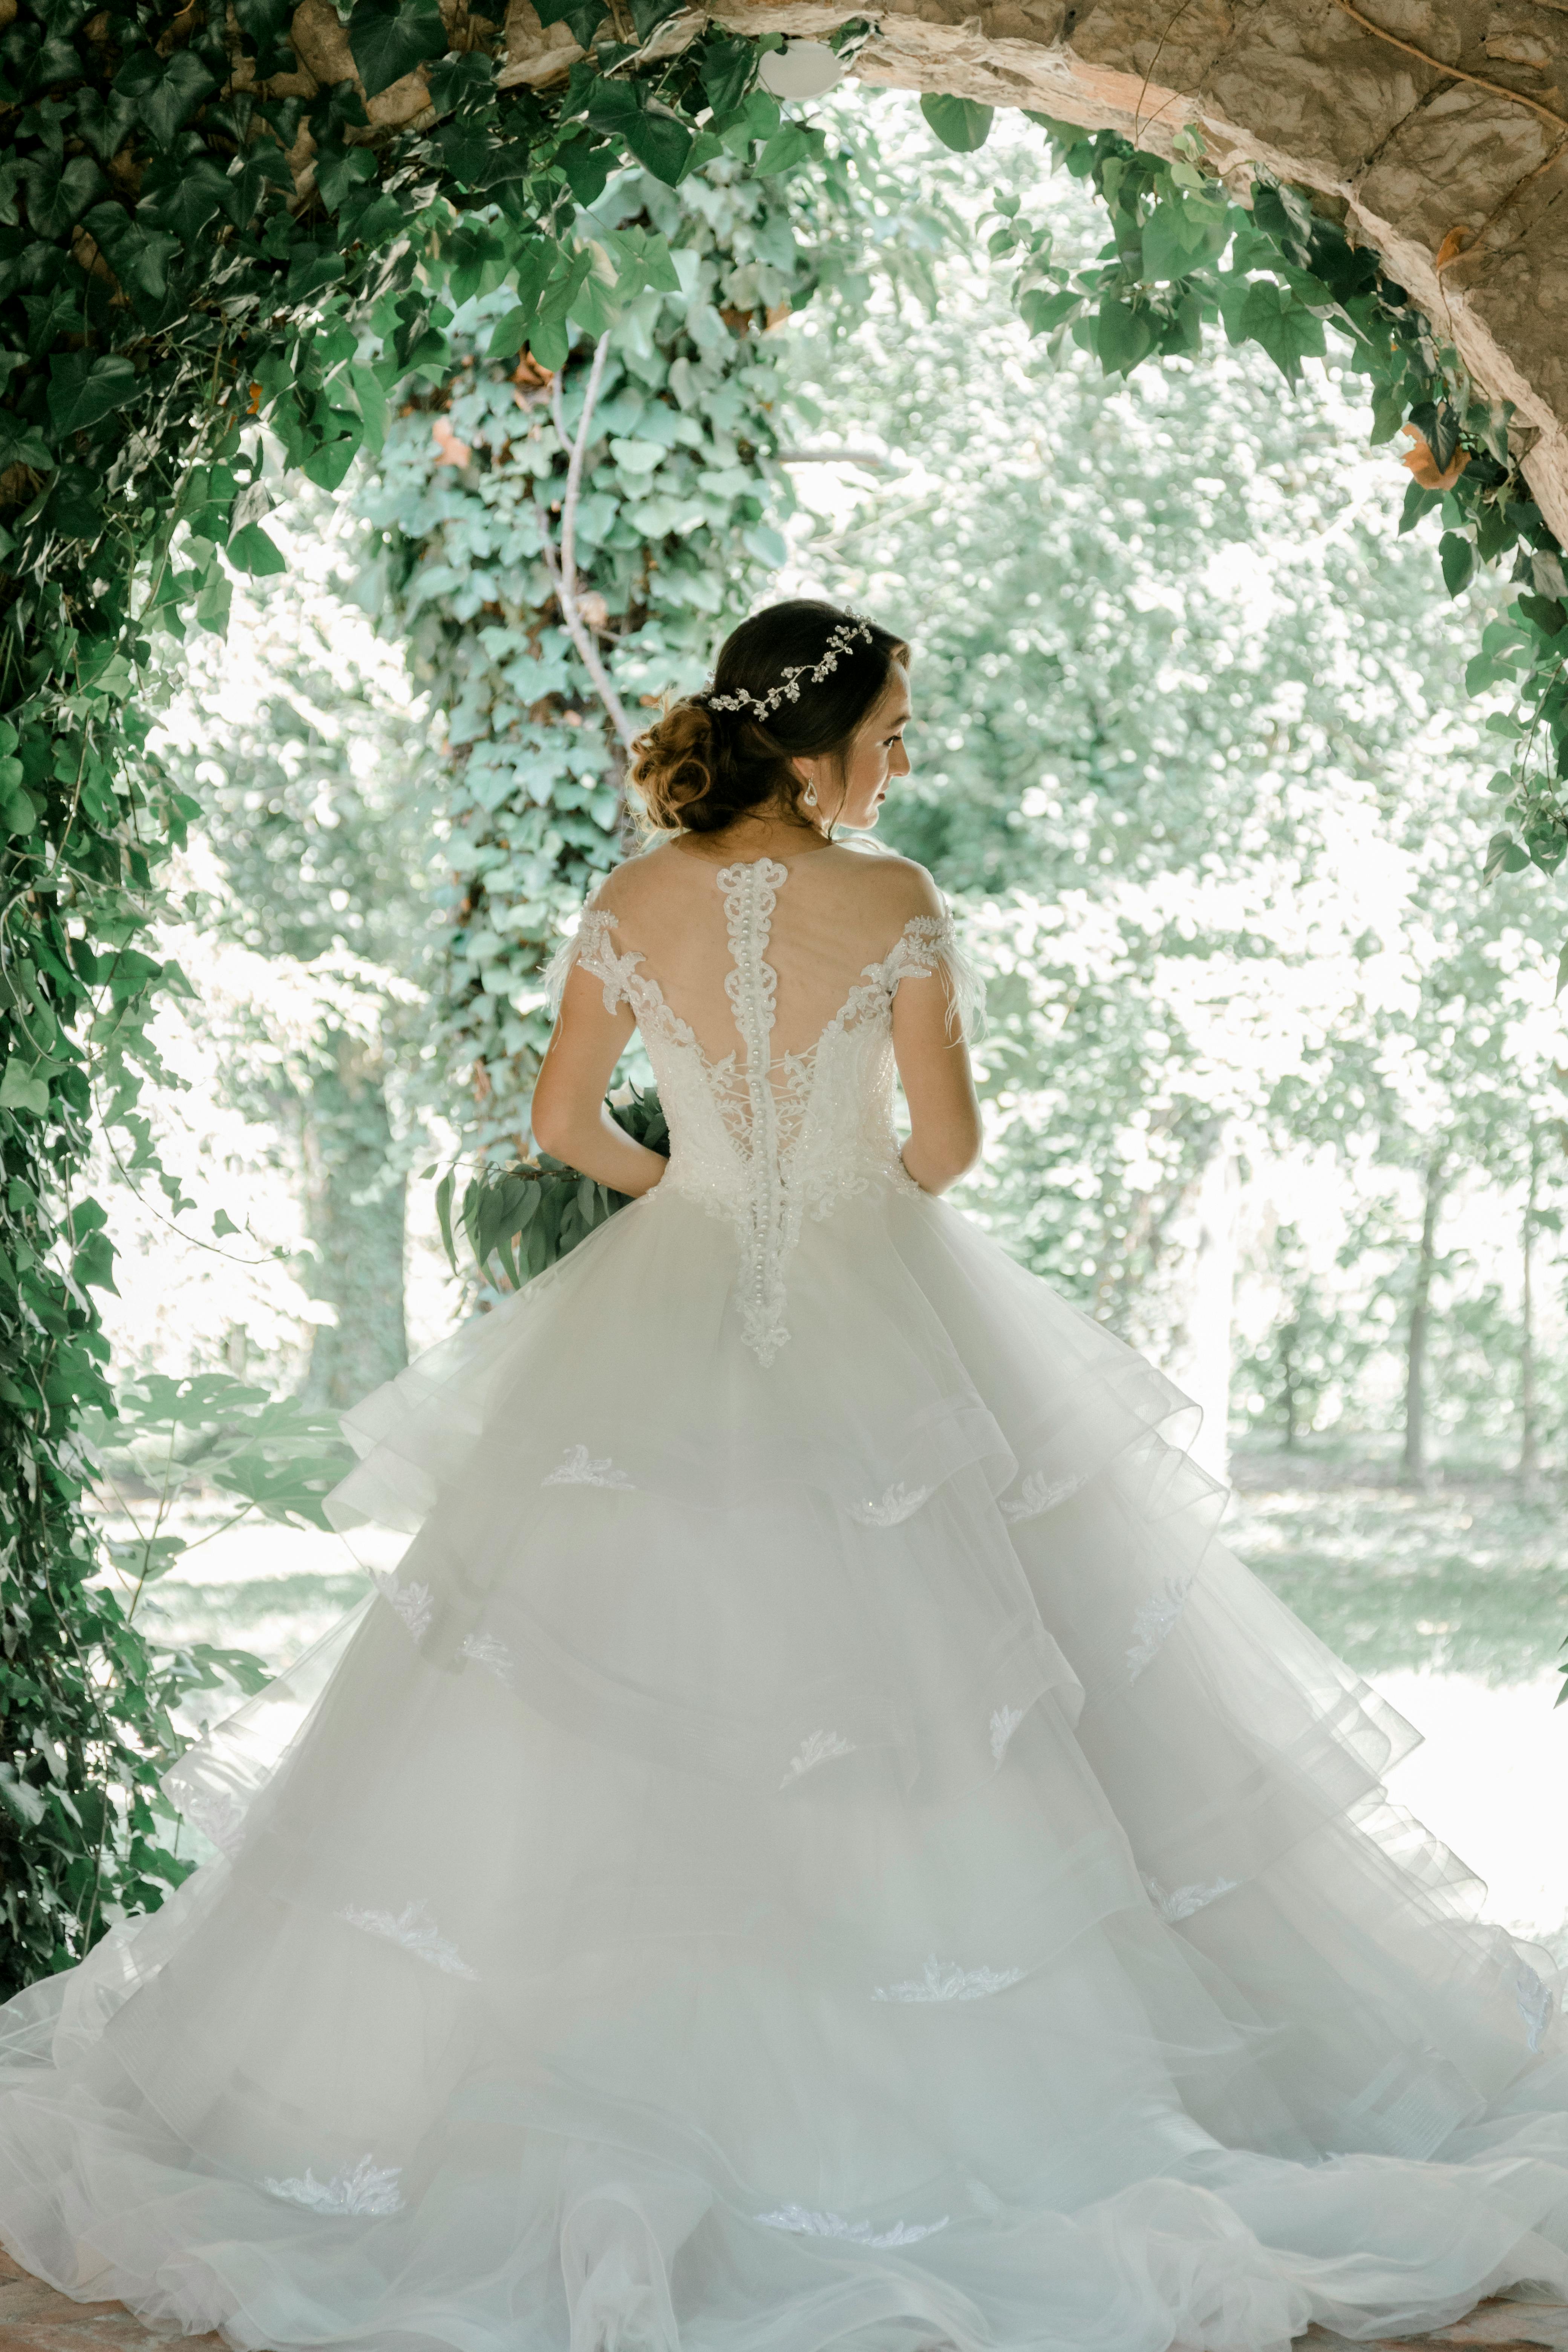 Woman wearing a white wedding gown. | Photo: Pexels